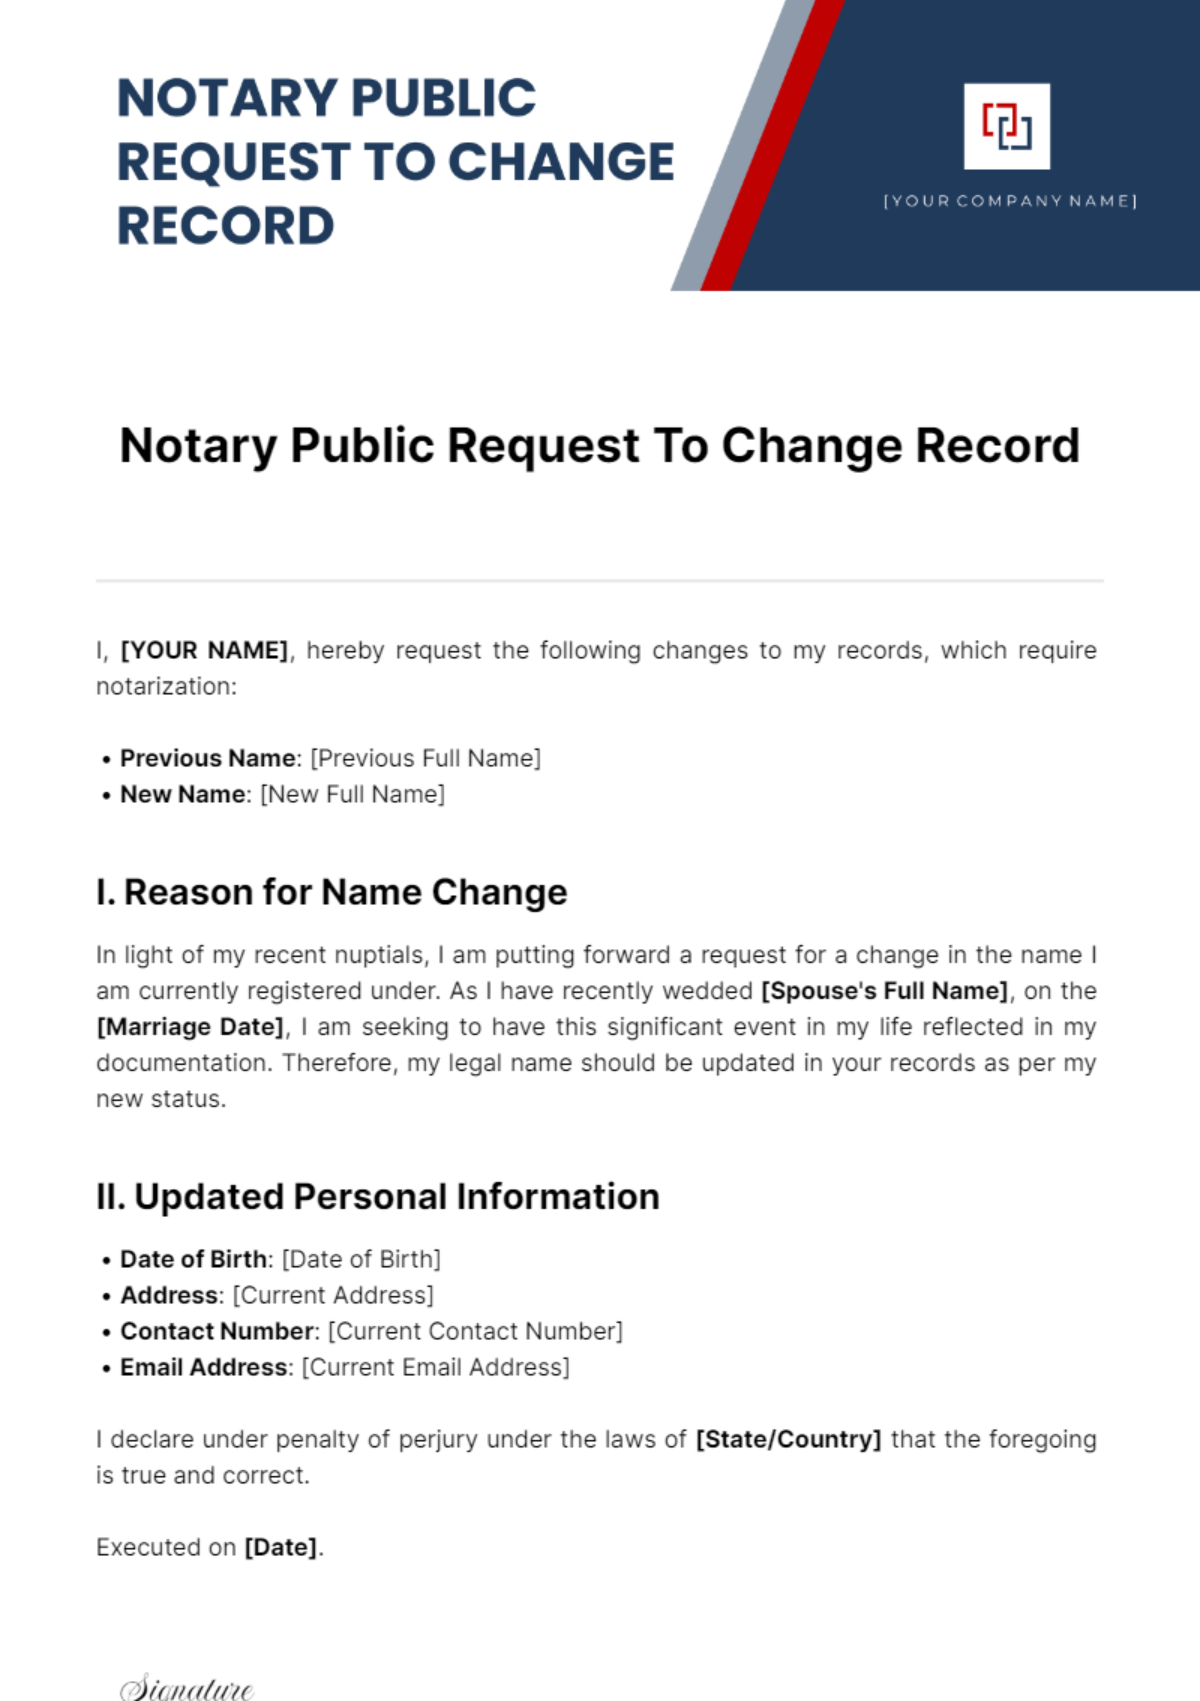 Notary Public Request To Change Record Template